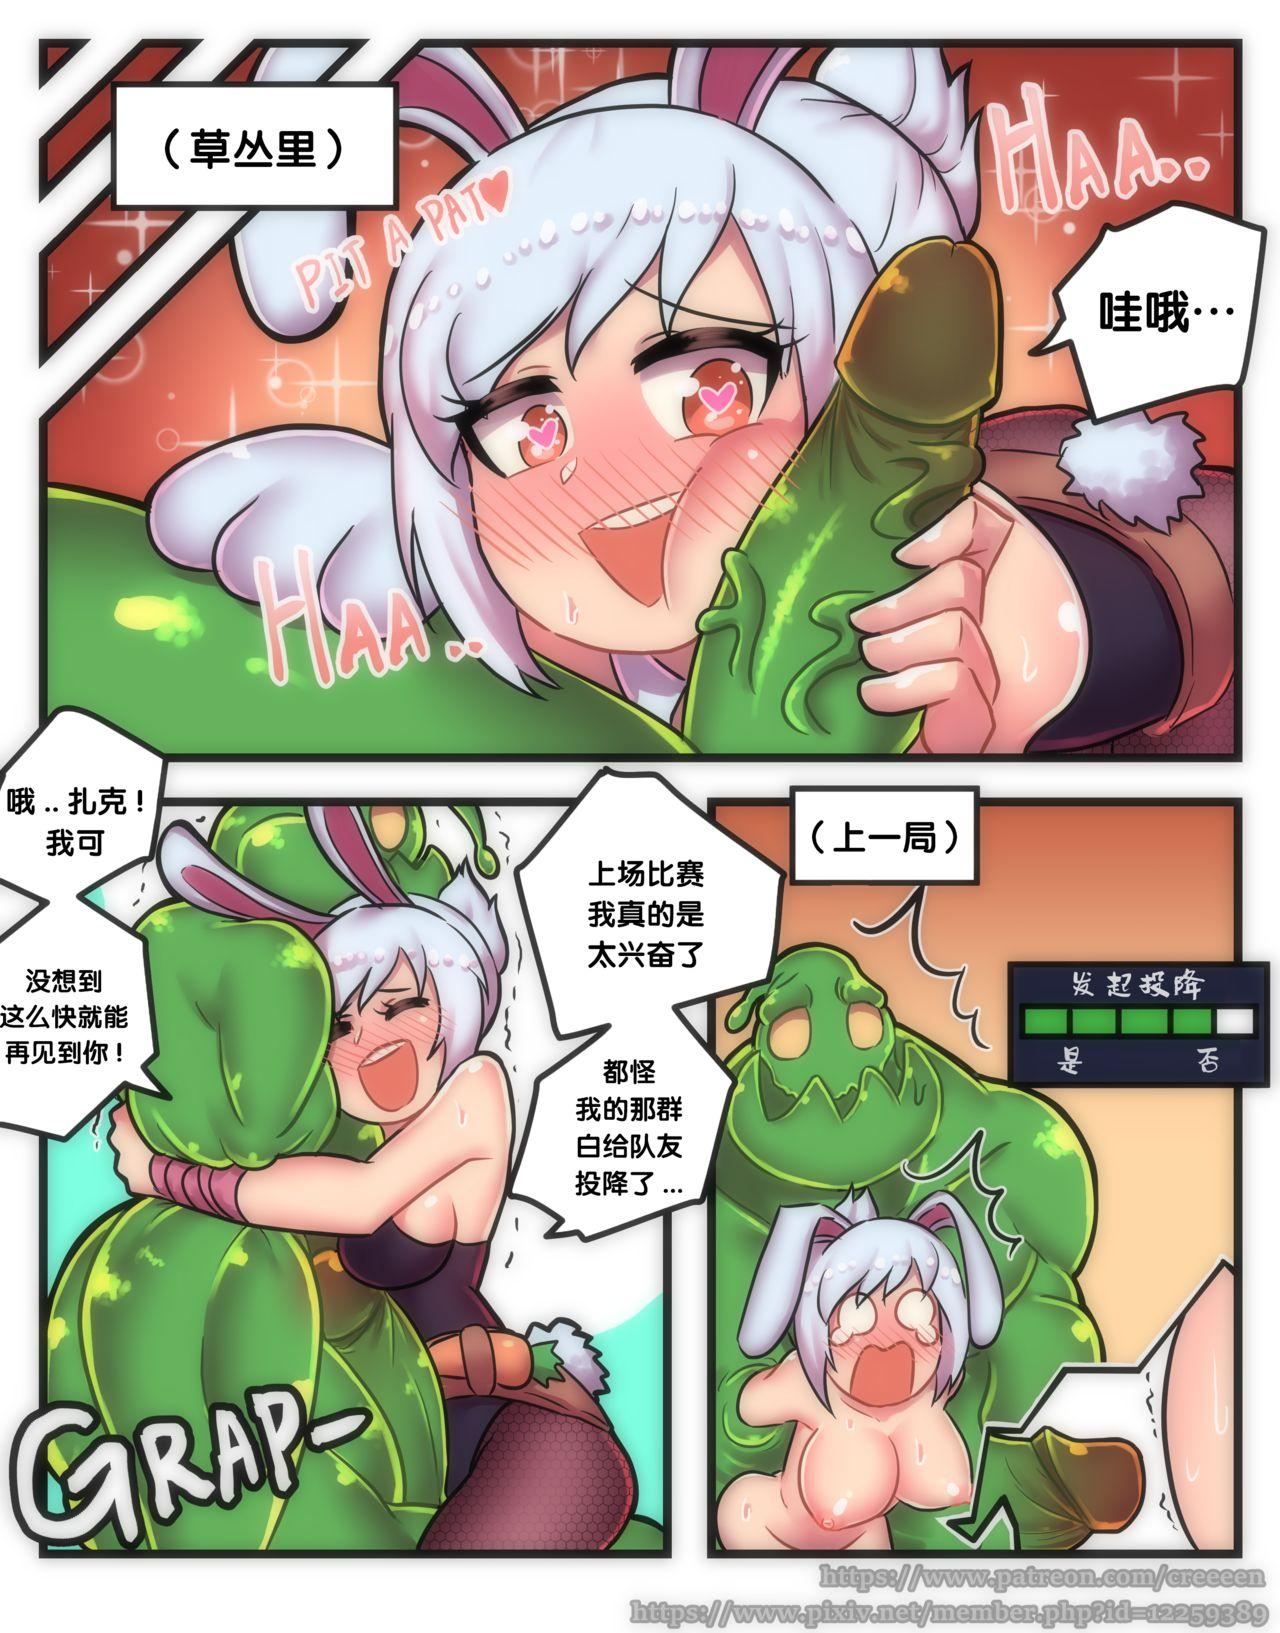 Shemale Rabbit Jelly - League of legends Interview - Page 3